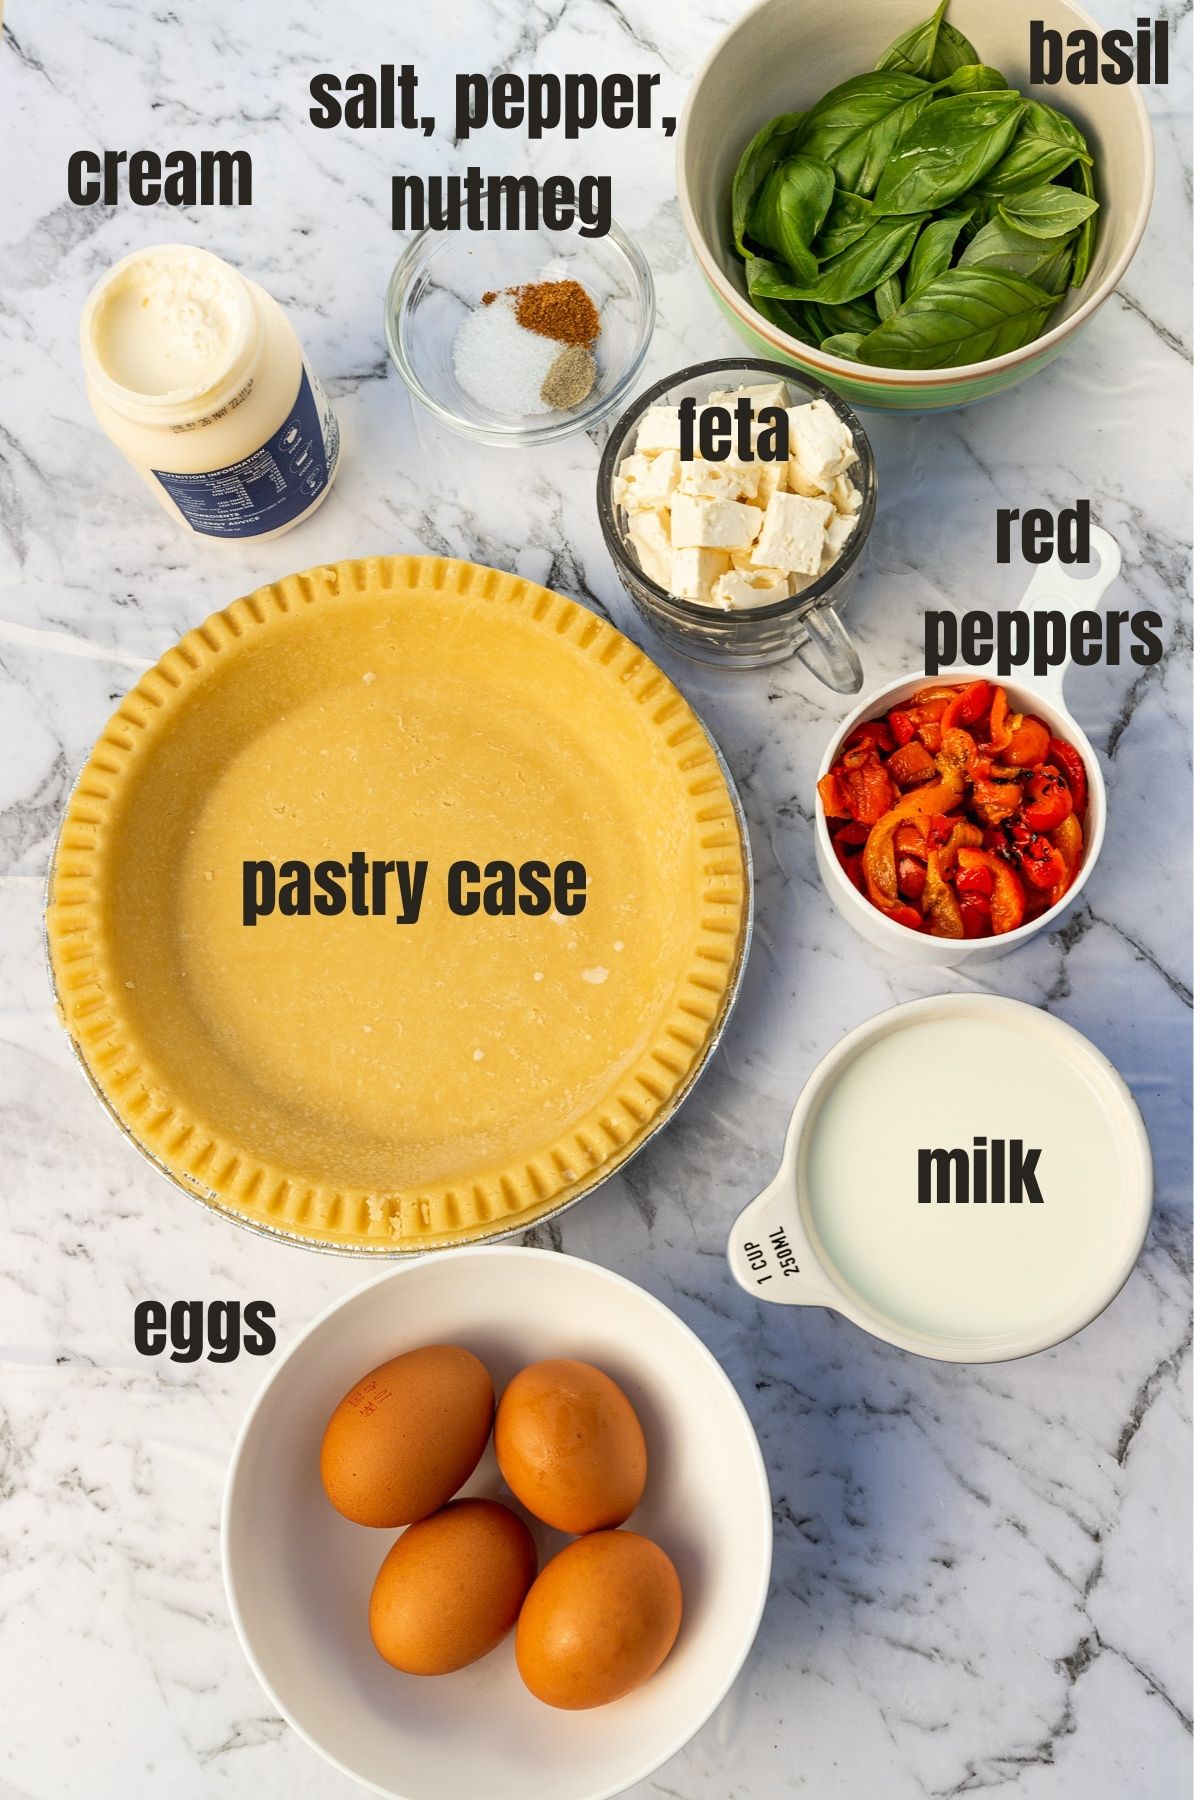 Overhead view of the labelled ingredients to make a red pepper feta quiche including eggs, milk, cream, basil, a pastry case, red pepper strips, feta cubes and seasoning.